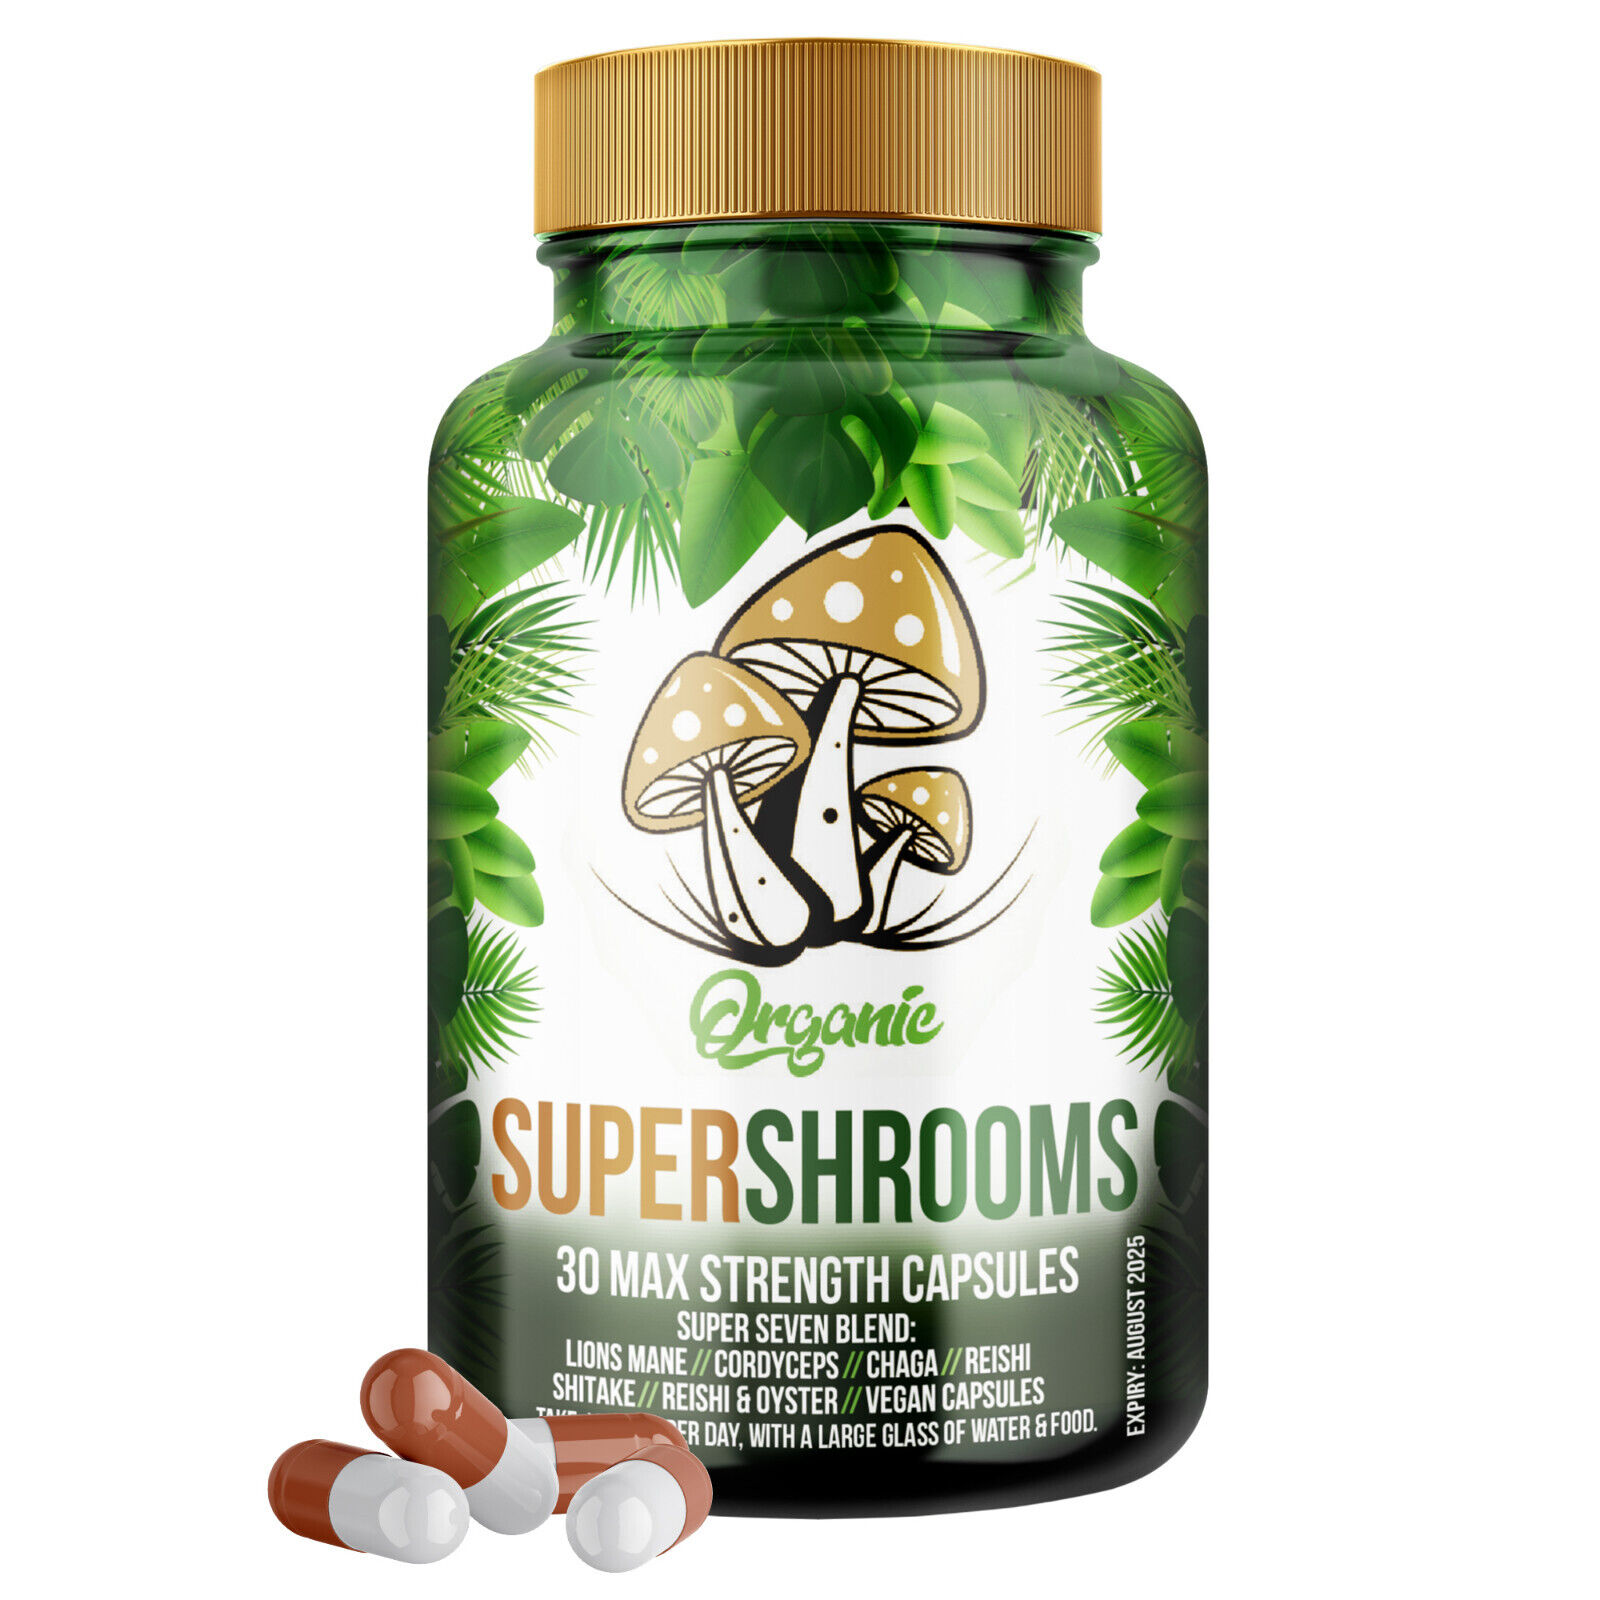 Ultimate Mushroom Extract Mix: Boost Your Performance!